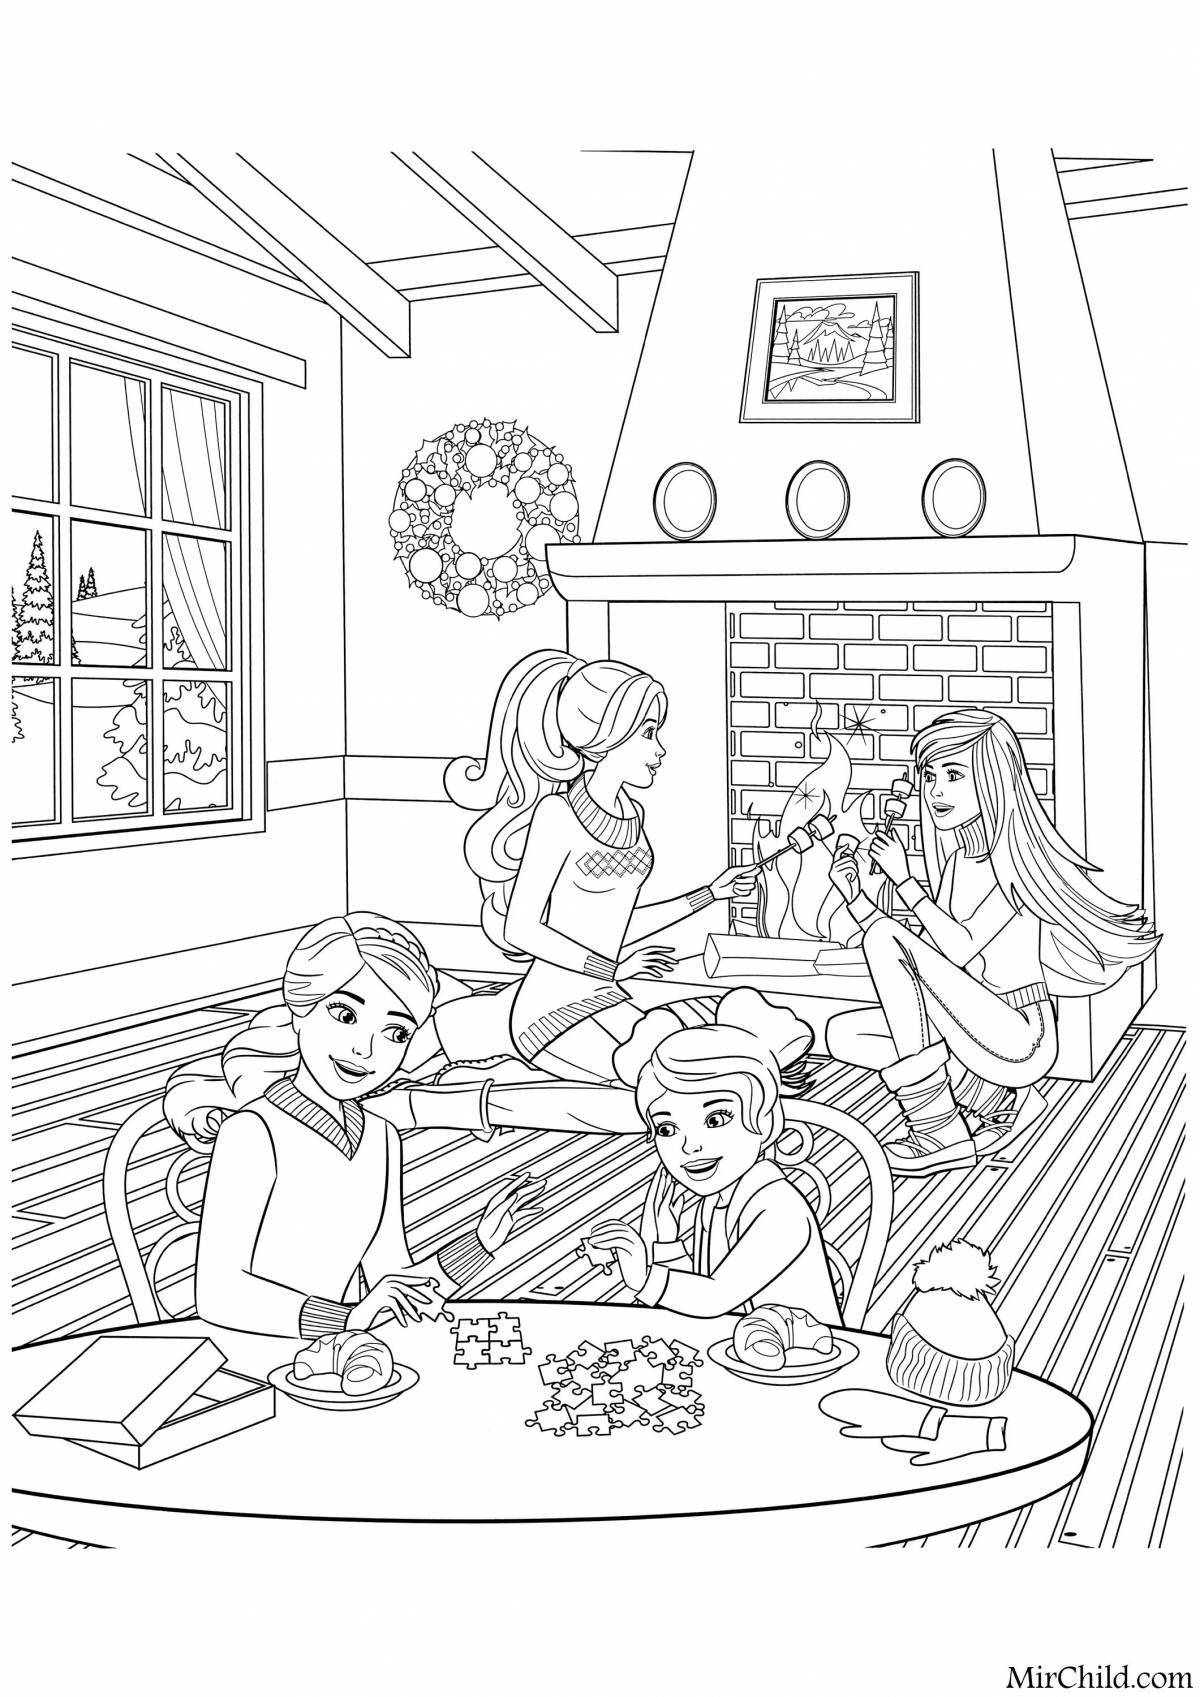 Charming barbie family coloring book